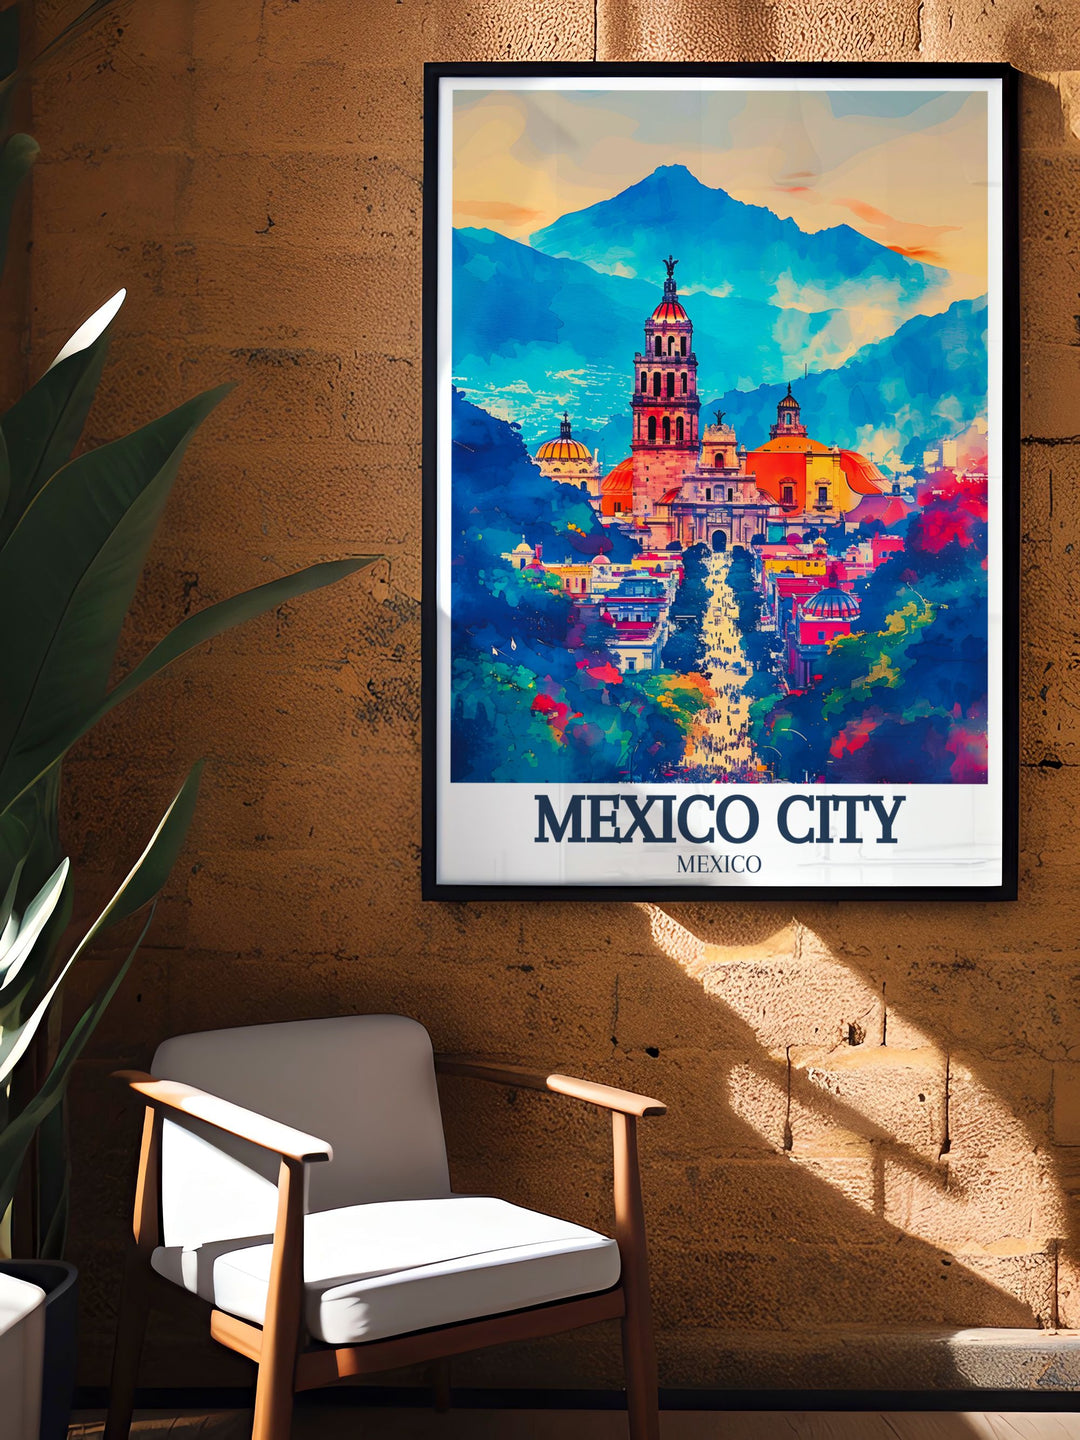 Elegant Mexico City travel print depicting Metropolitan cathedral Zocalo Chapultepec castle. This artwork is a perfect gift for lovers of Mexican culture and history adding a touch of sophistication to any room.